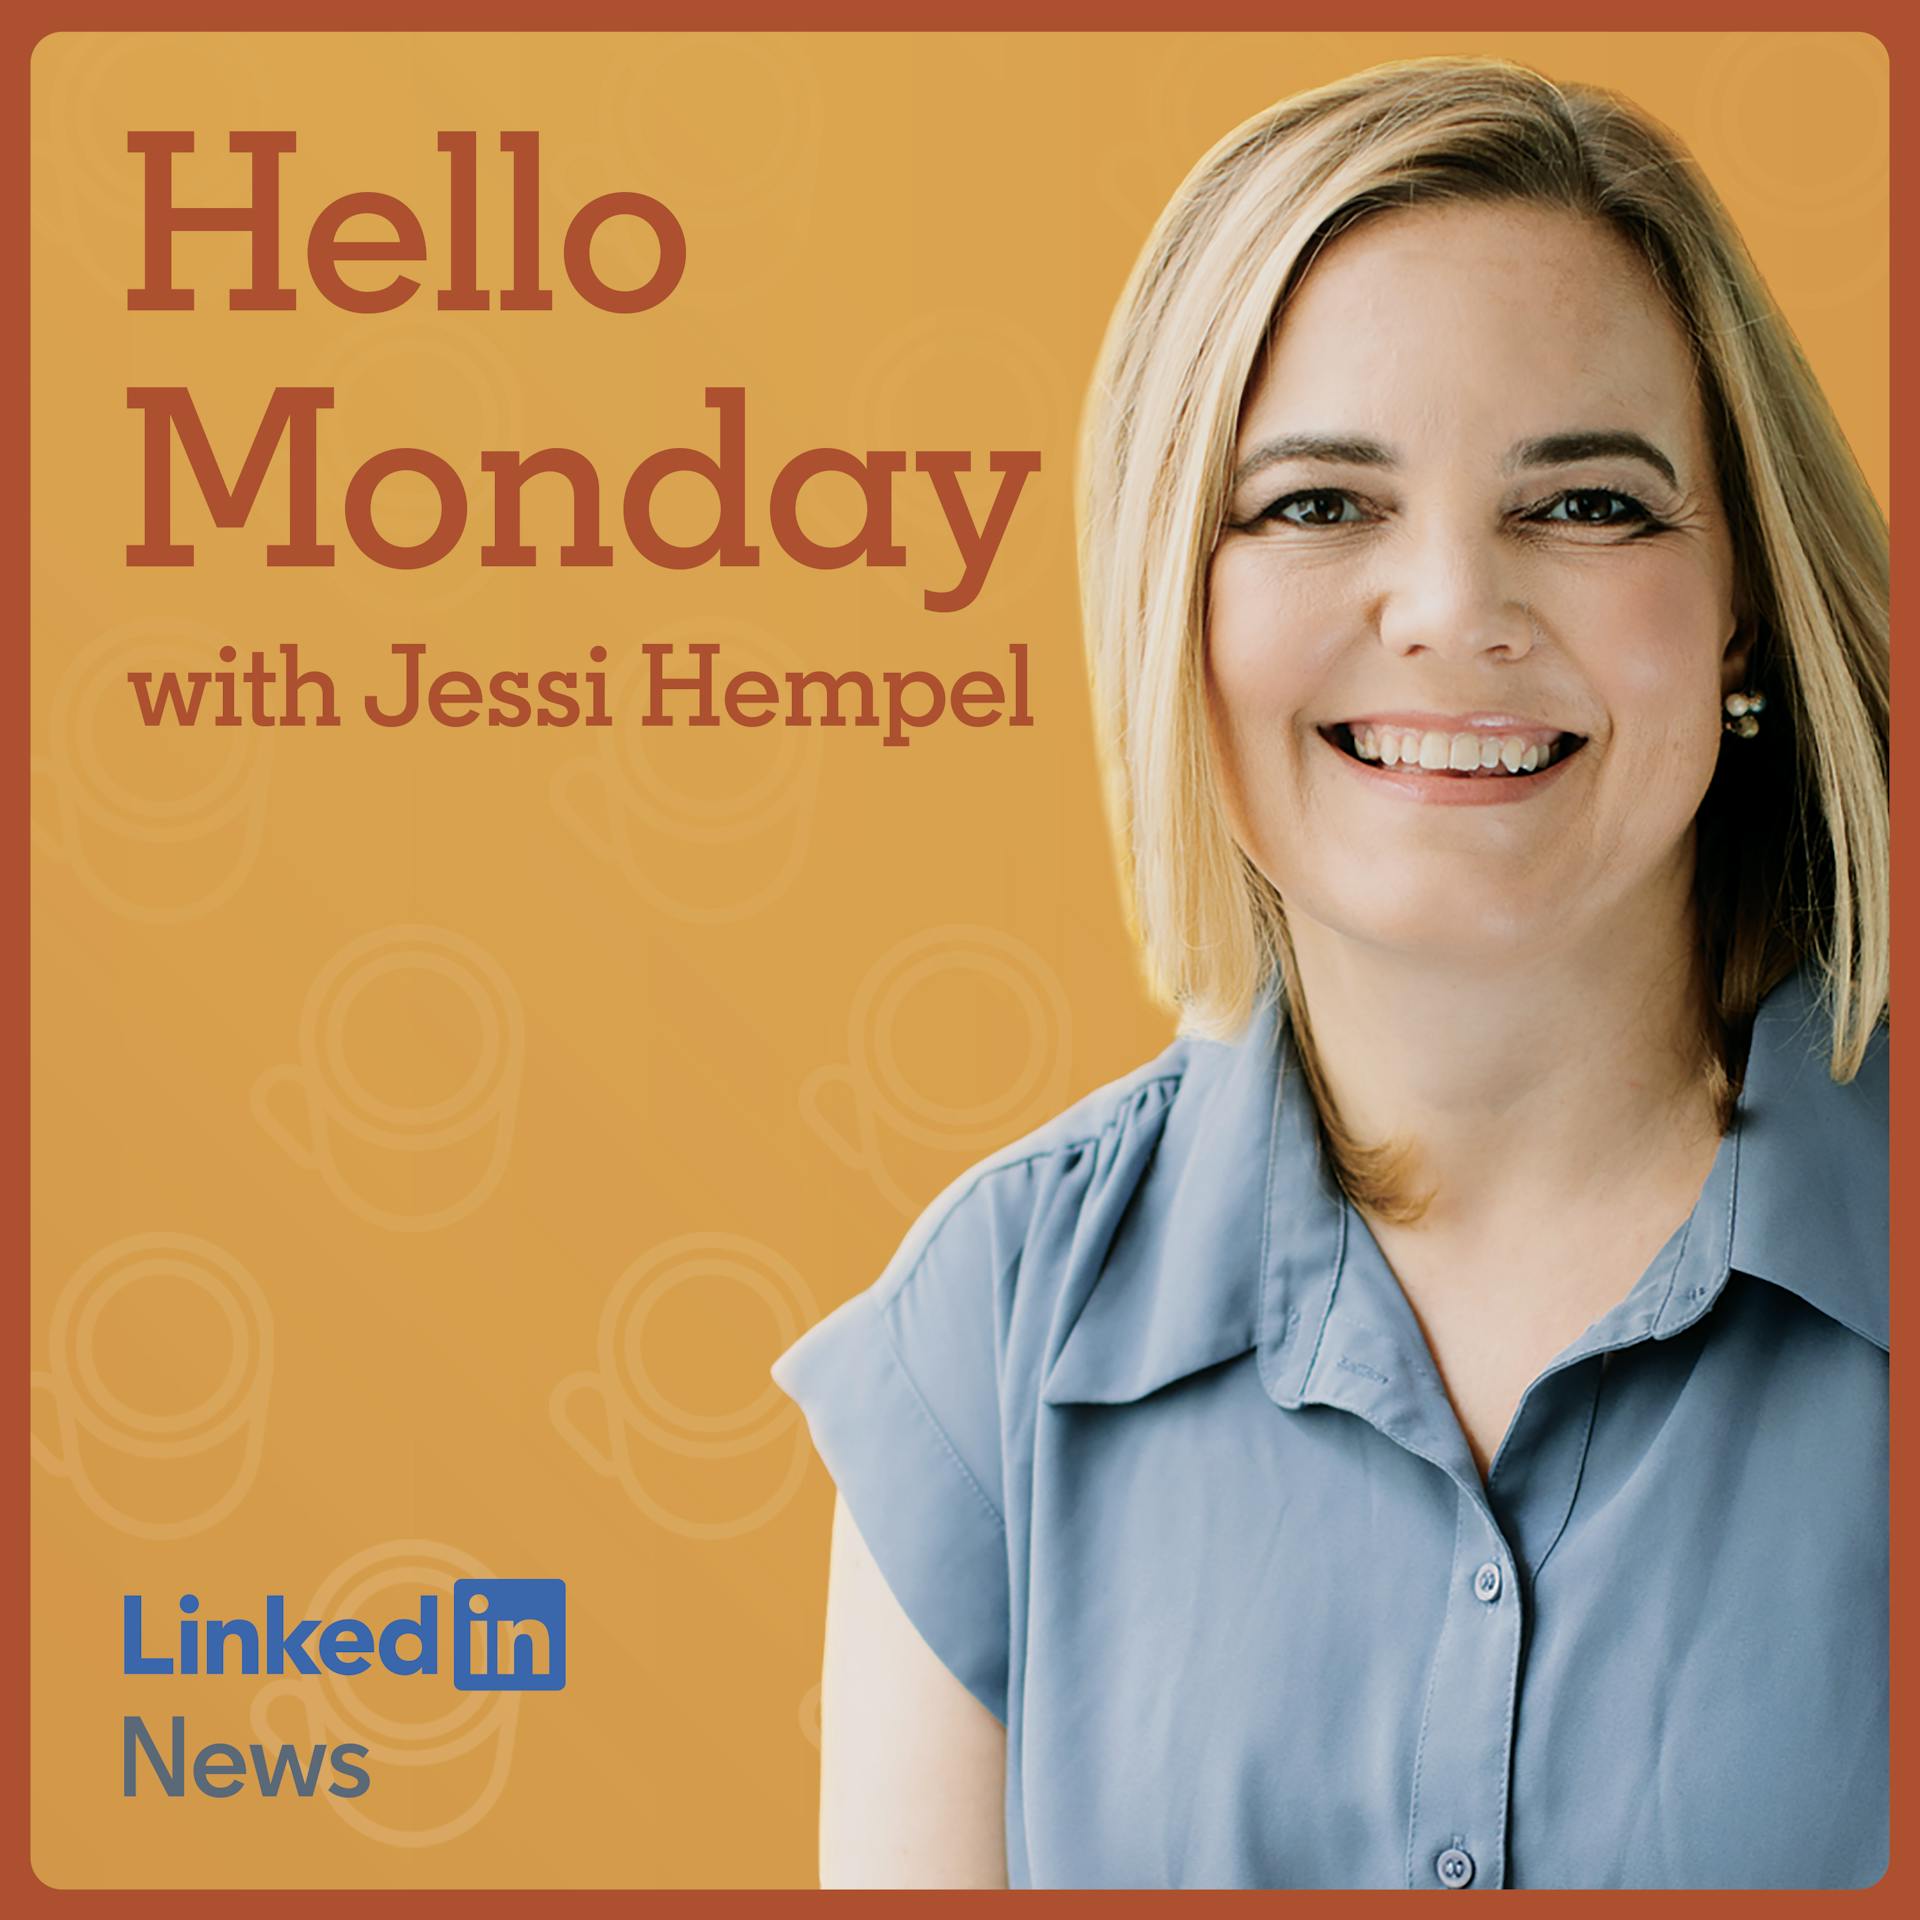 Review: Hello Monday from LinkedIn